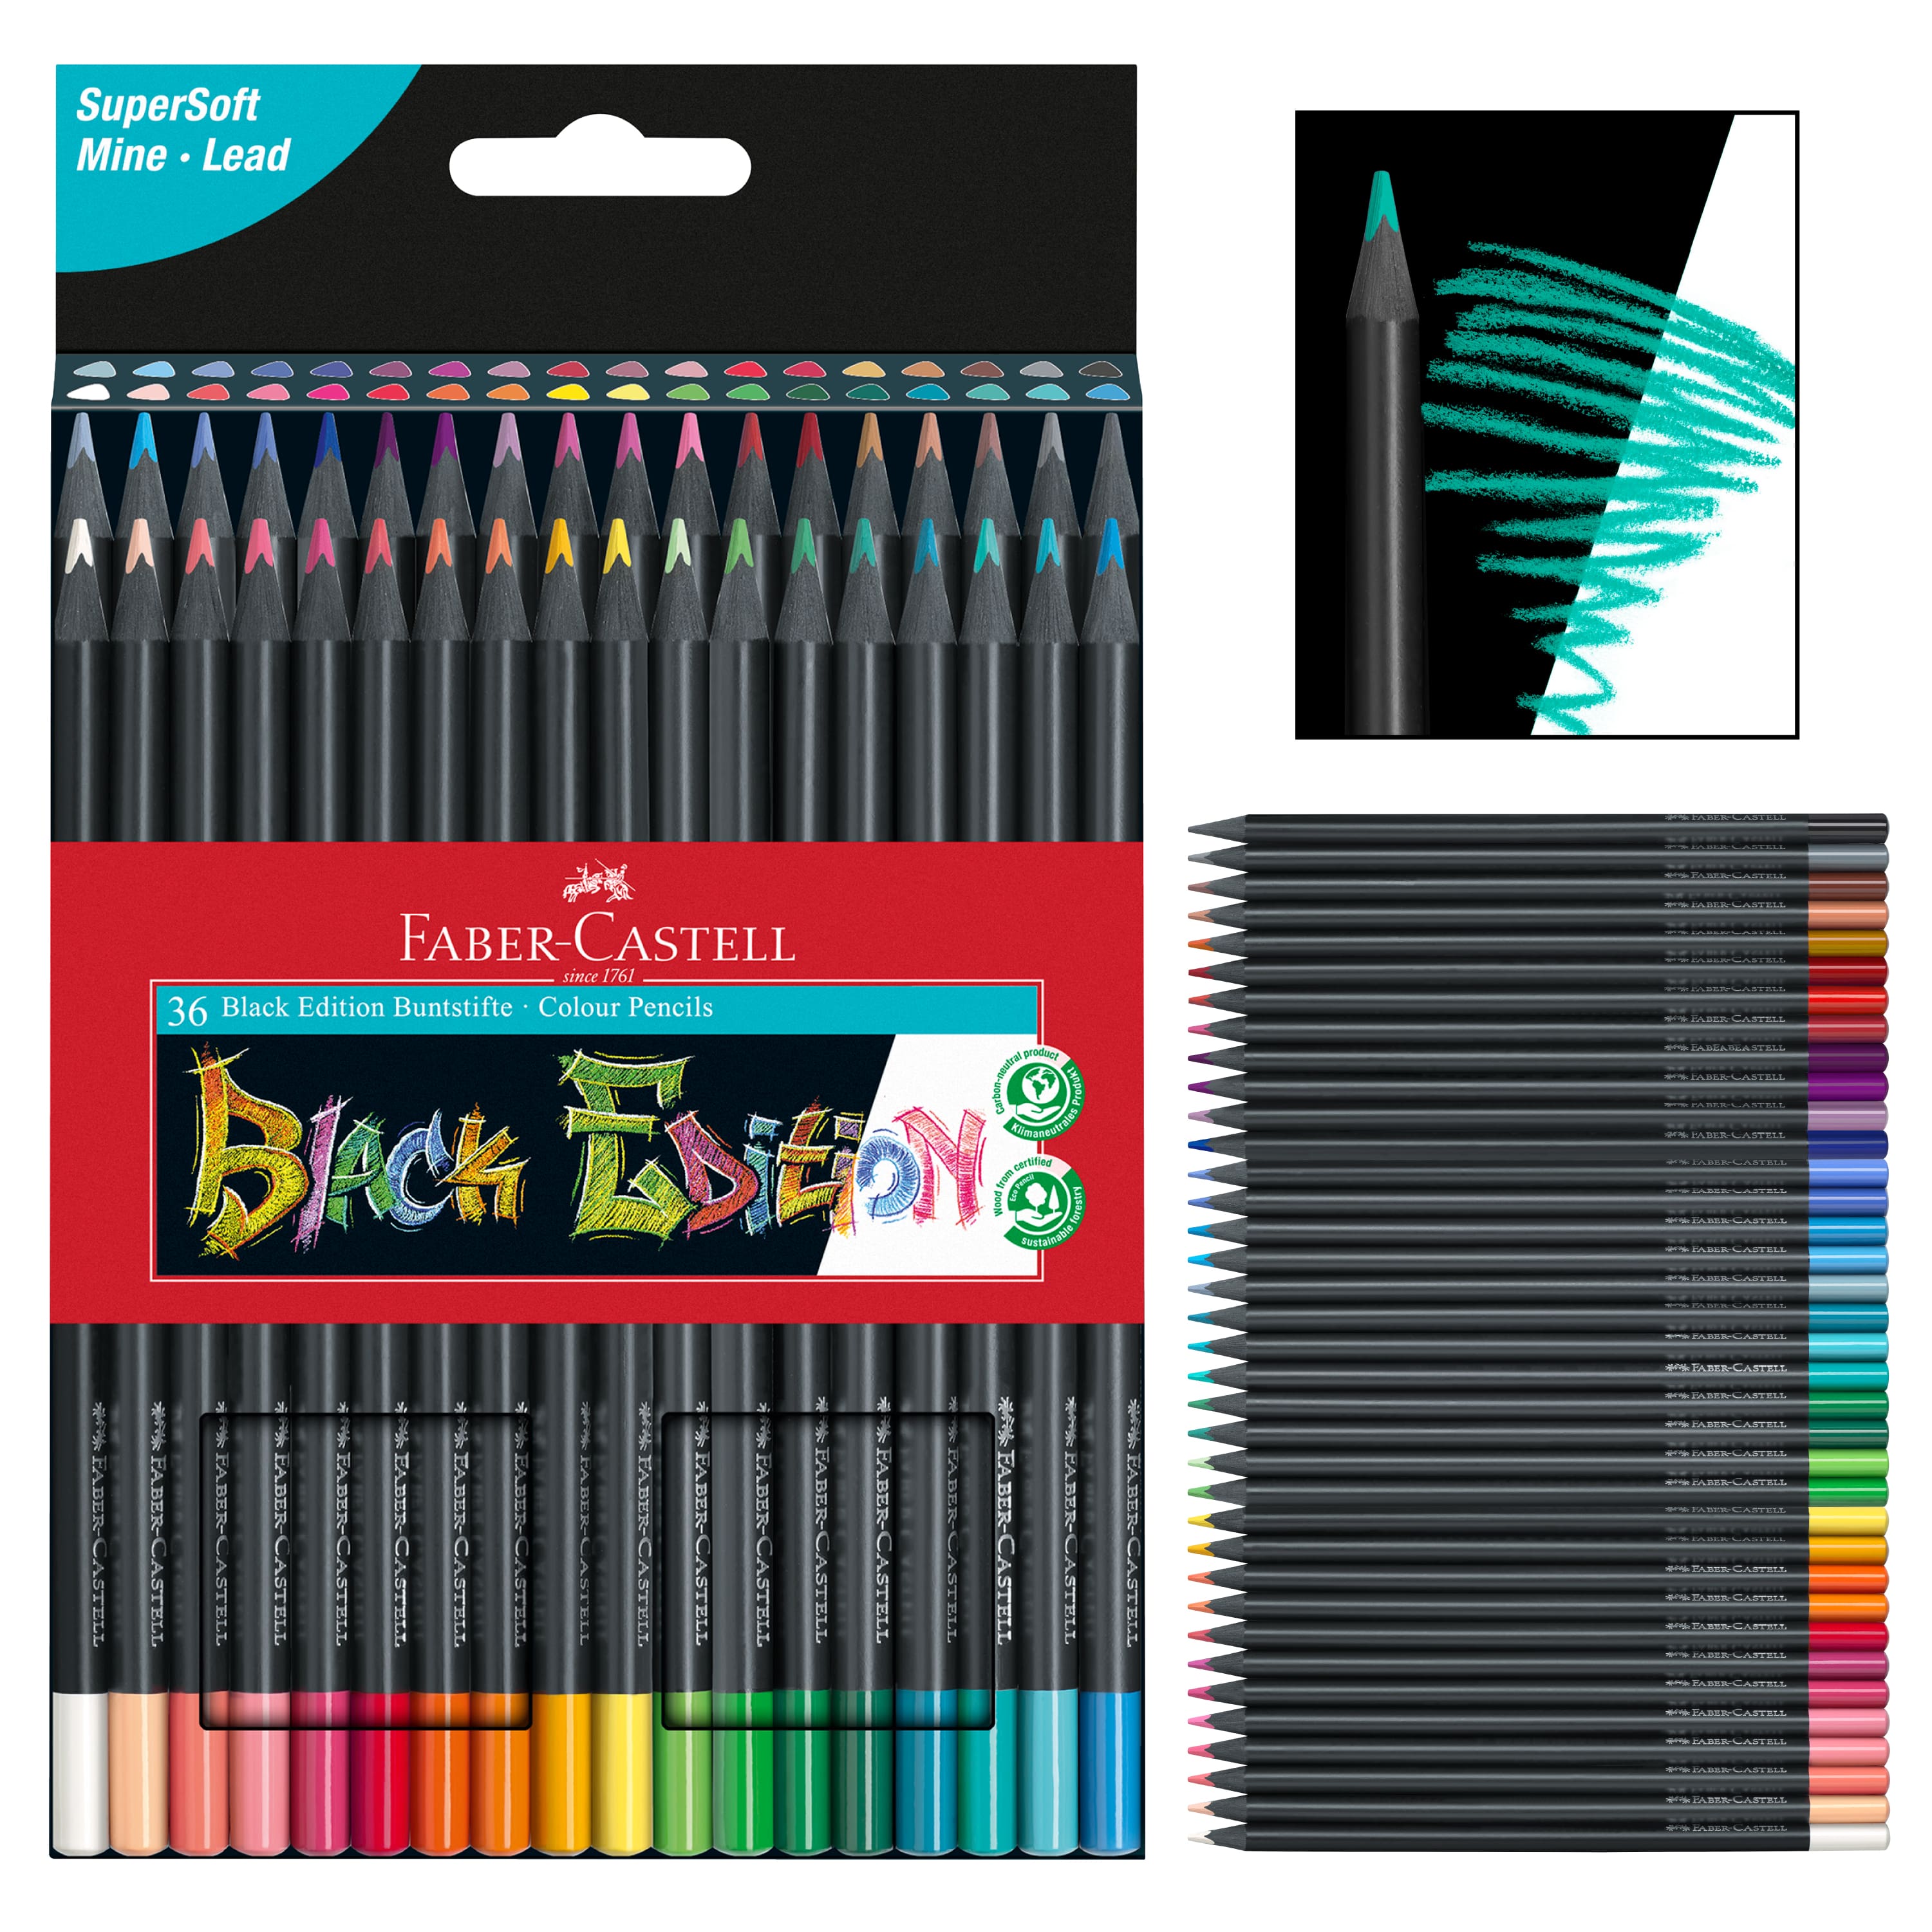 SuperSoft by Faber-Castell